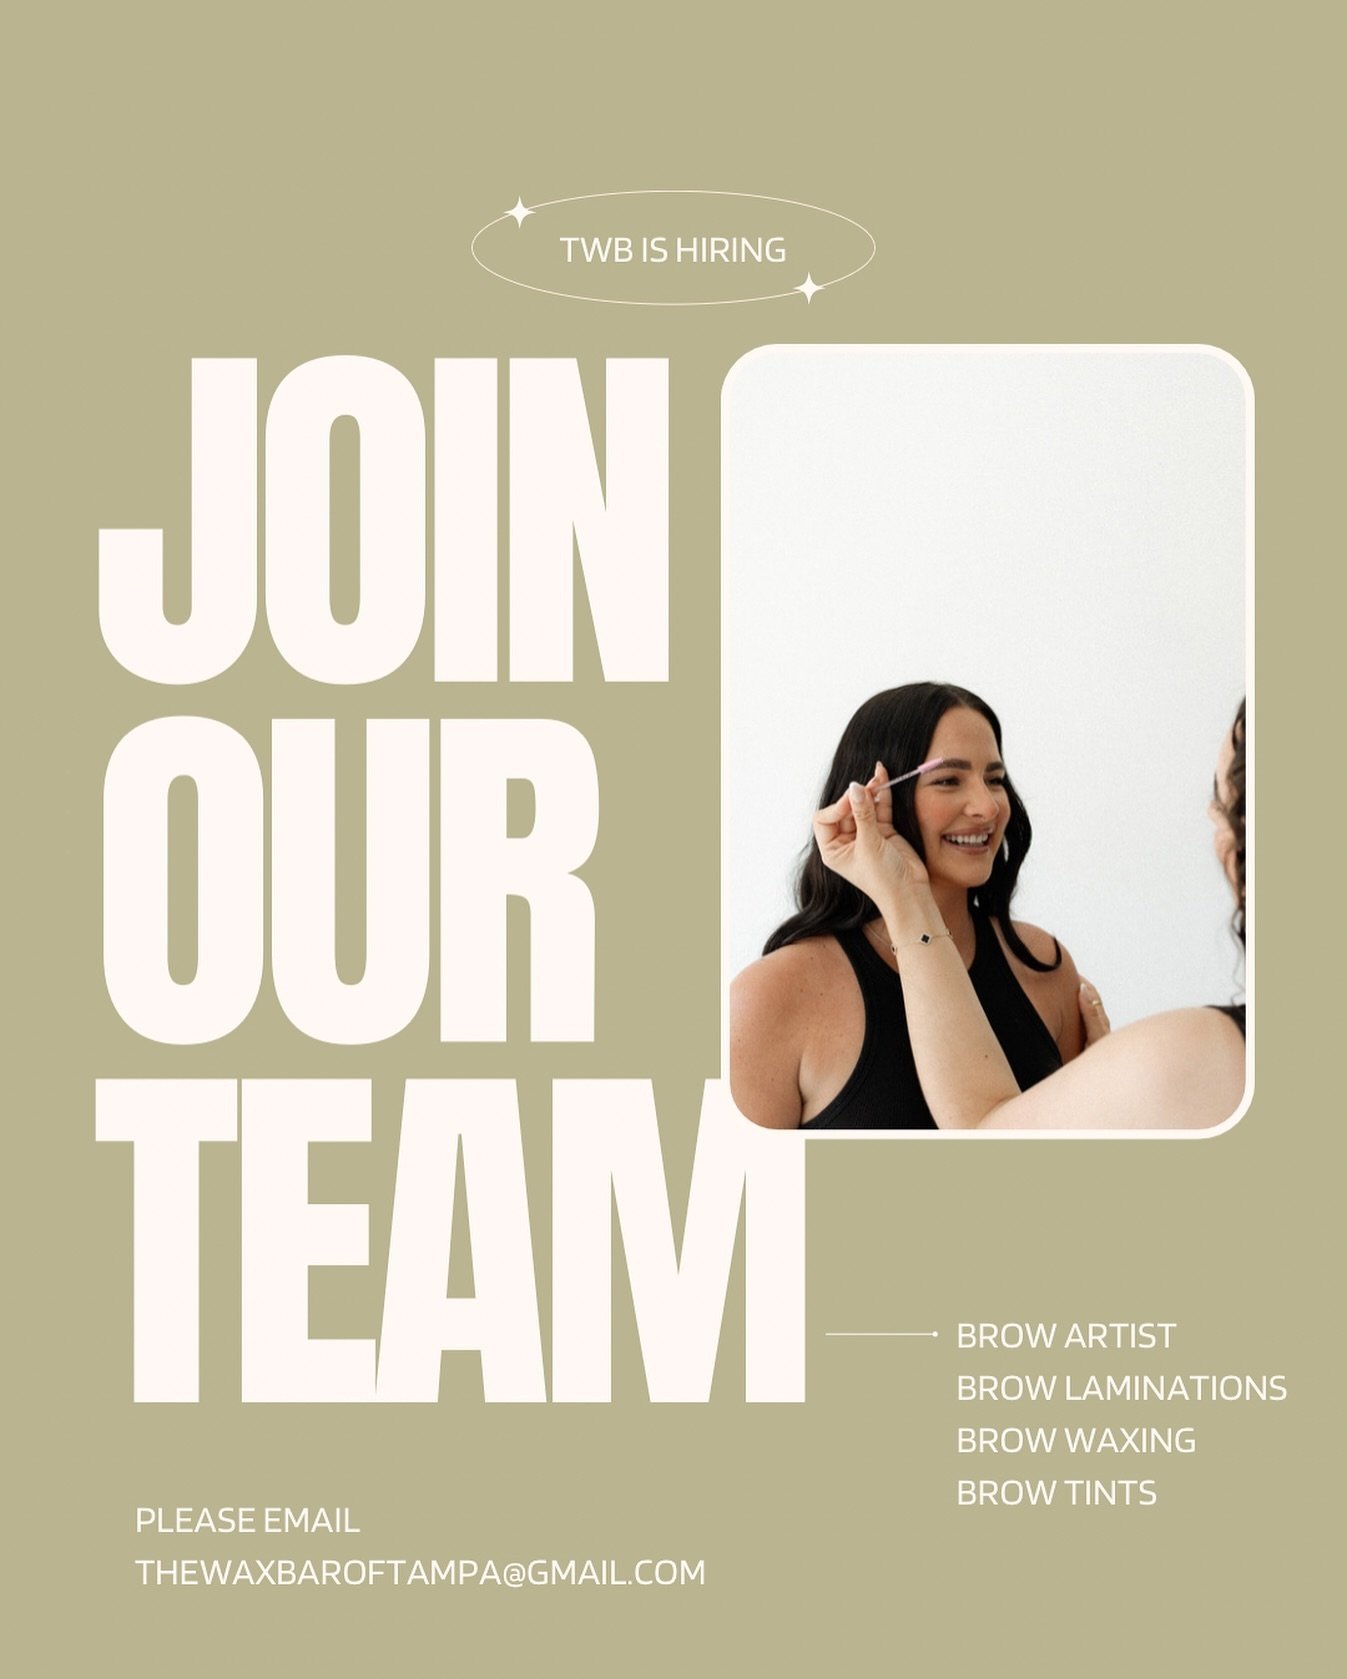 The Wax Bar of Tampa is currently seeking an experienced part time brow artist to join our team. If you are passionate about creating beautiful and well-defined brows, we want to hear from you. As a brow artist at our studio, you will have the opport